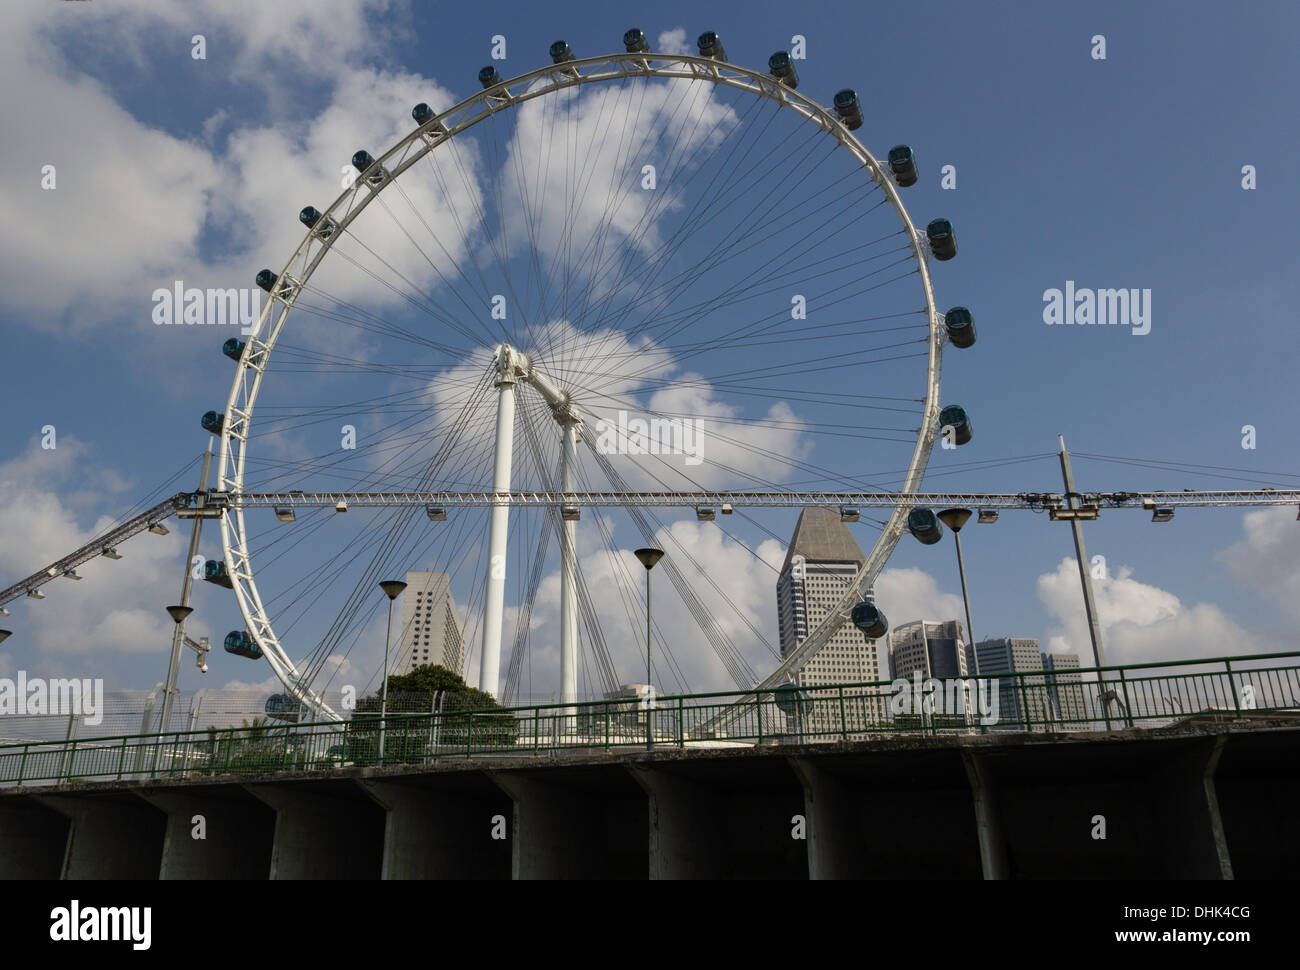 The circle of the Singapore Flyer along with preparation of Formula One race over a bridge. Lighting equipment for the race. Stock Photo